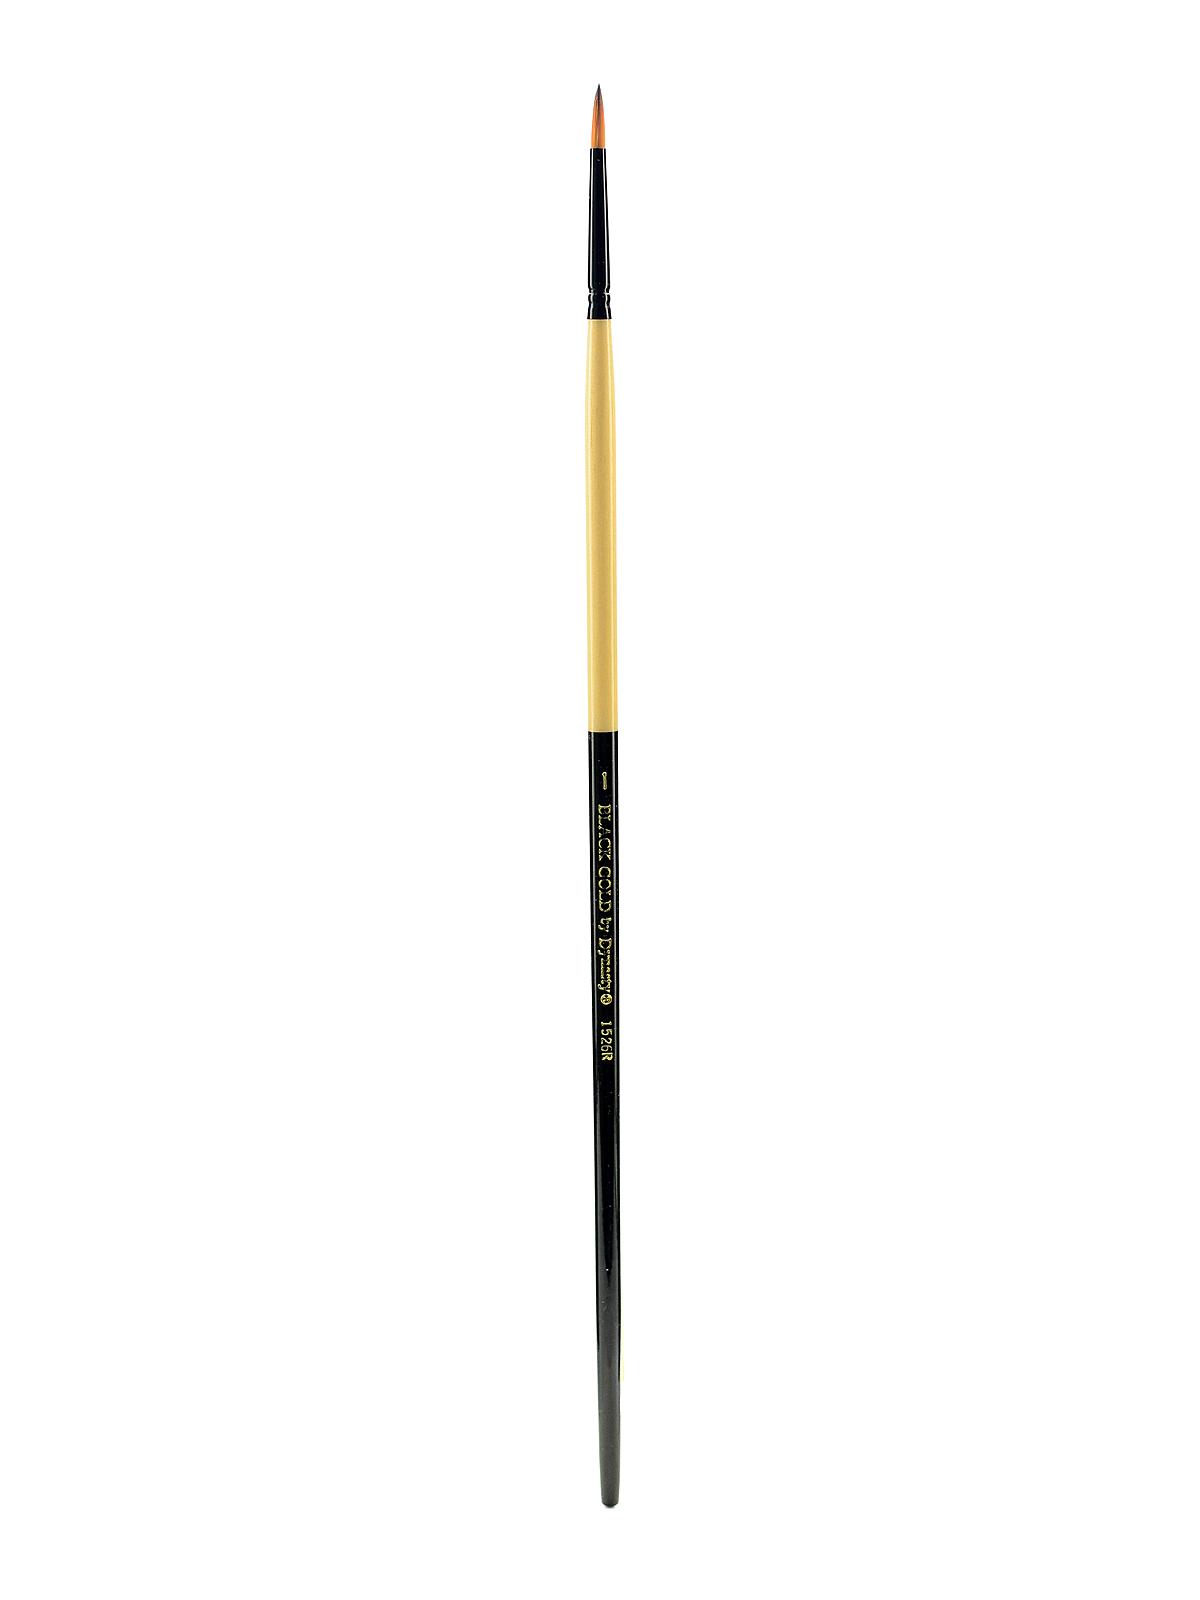 Black Gold Series Long Handled Synthetic Brushes 1 Round 1526r